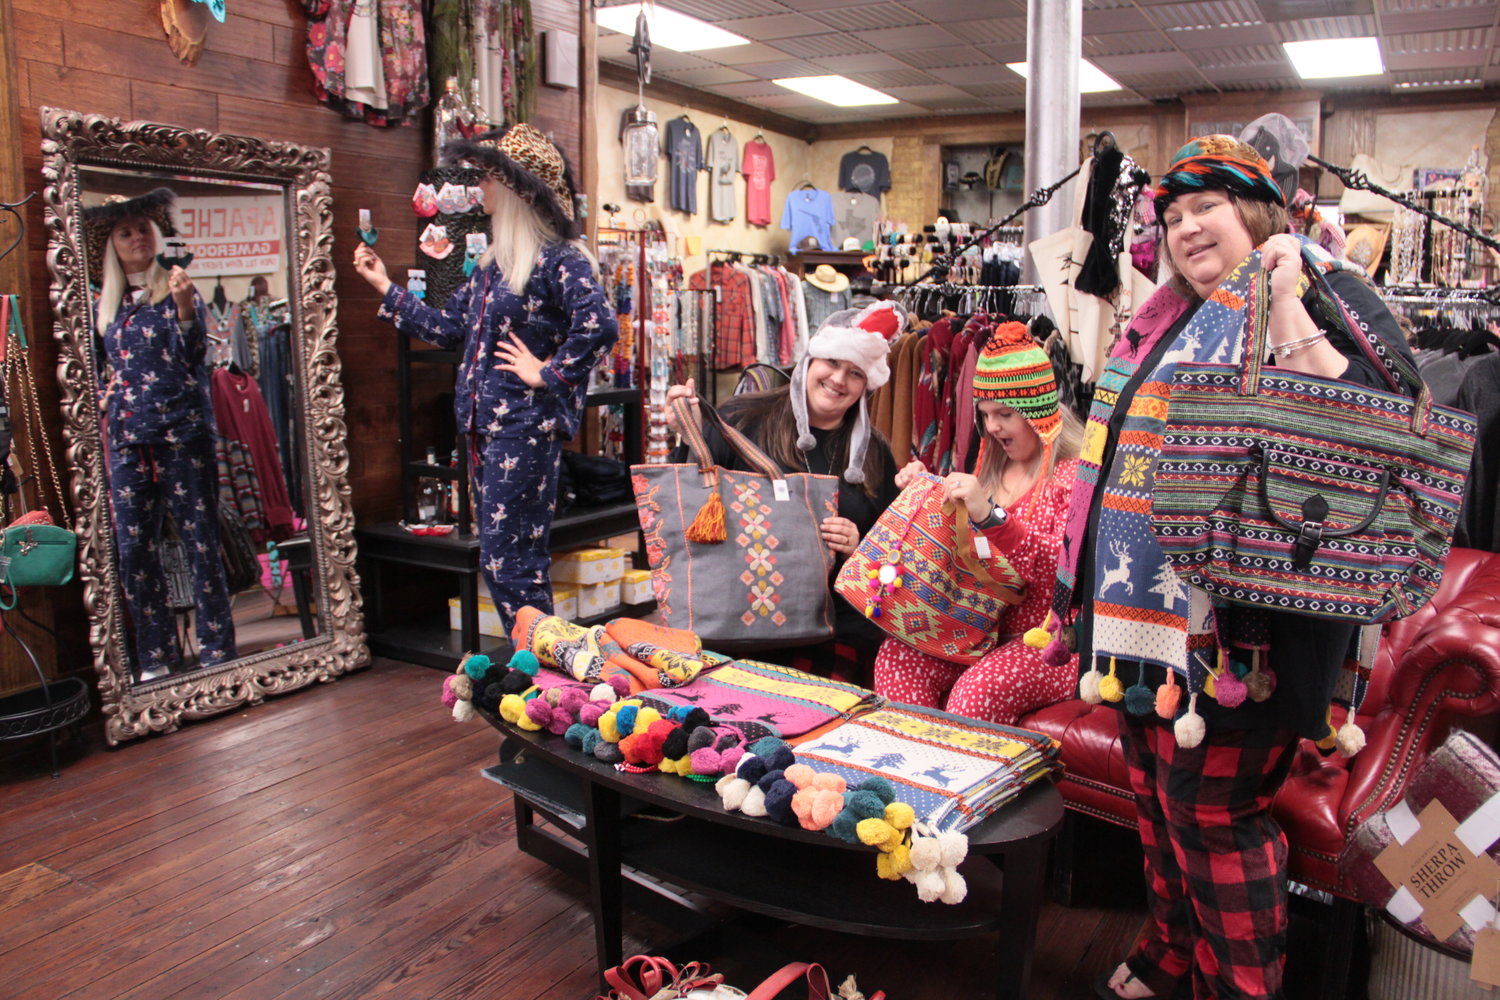 Downtown Gonzales can expect a pajama party on Black Friday, with Angels and Outlaws offering sweet deals and cool drinks for shoppers that are early to rise.